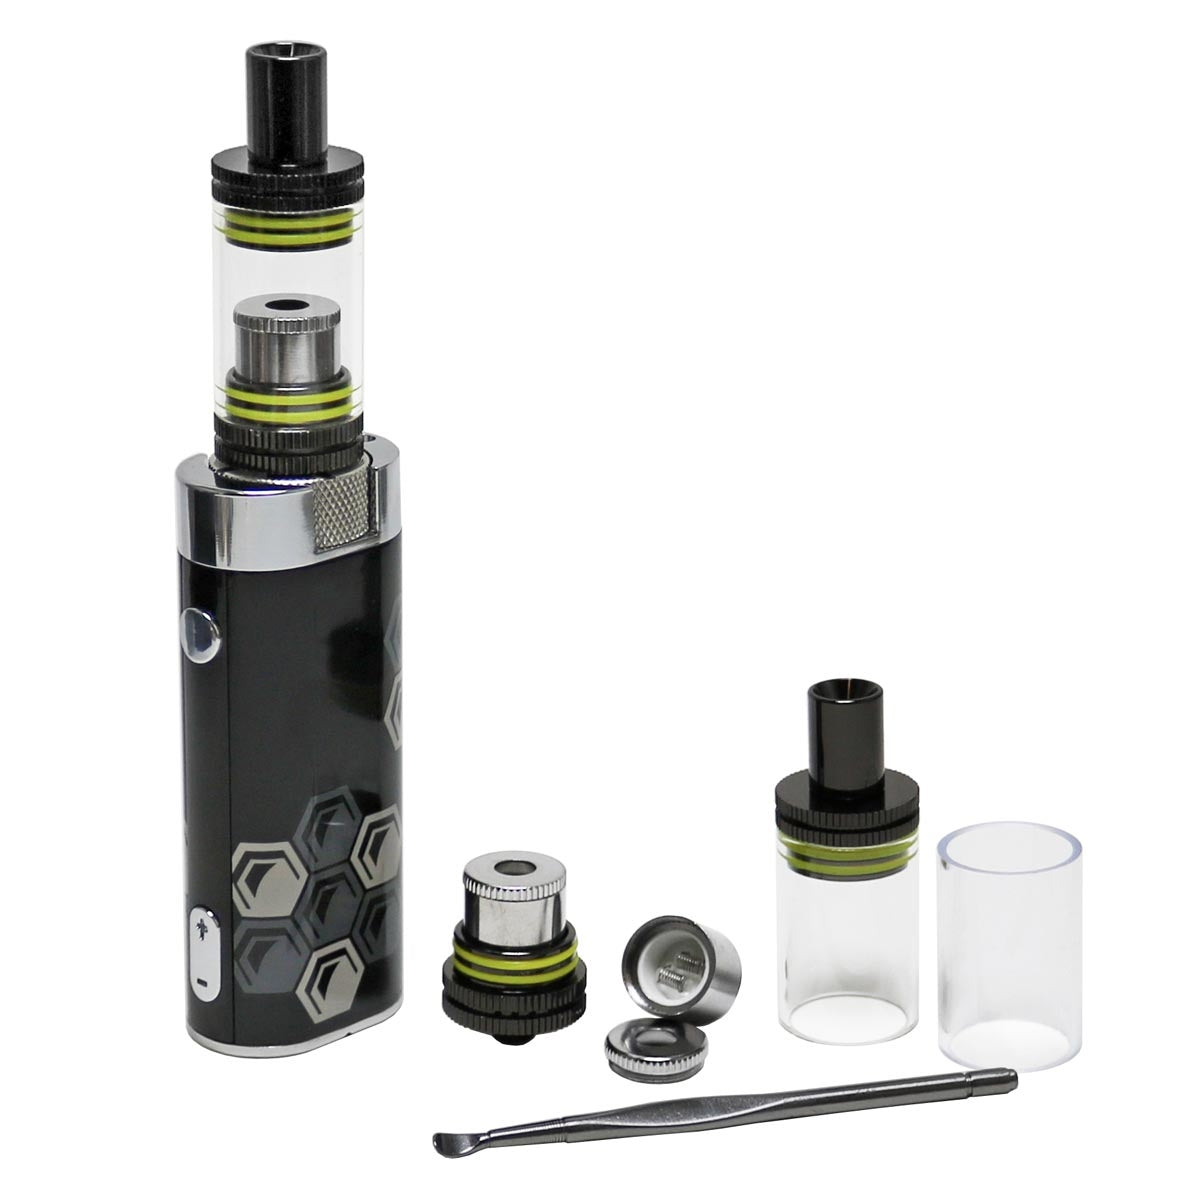 Defender 3-in-1 Vape Kit for Essential Oil, Wax and Dry Herbs